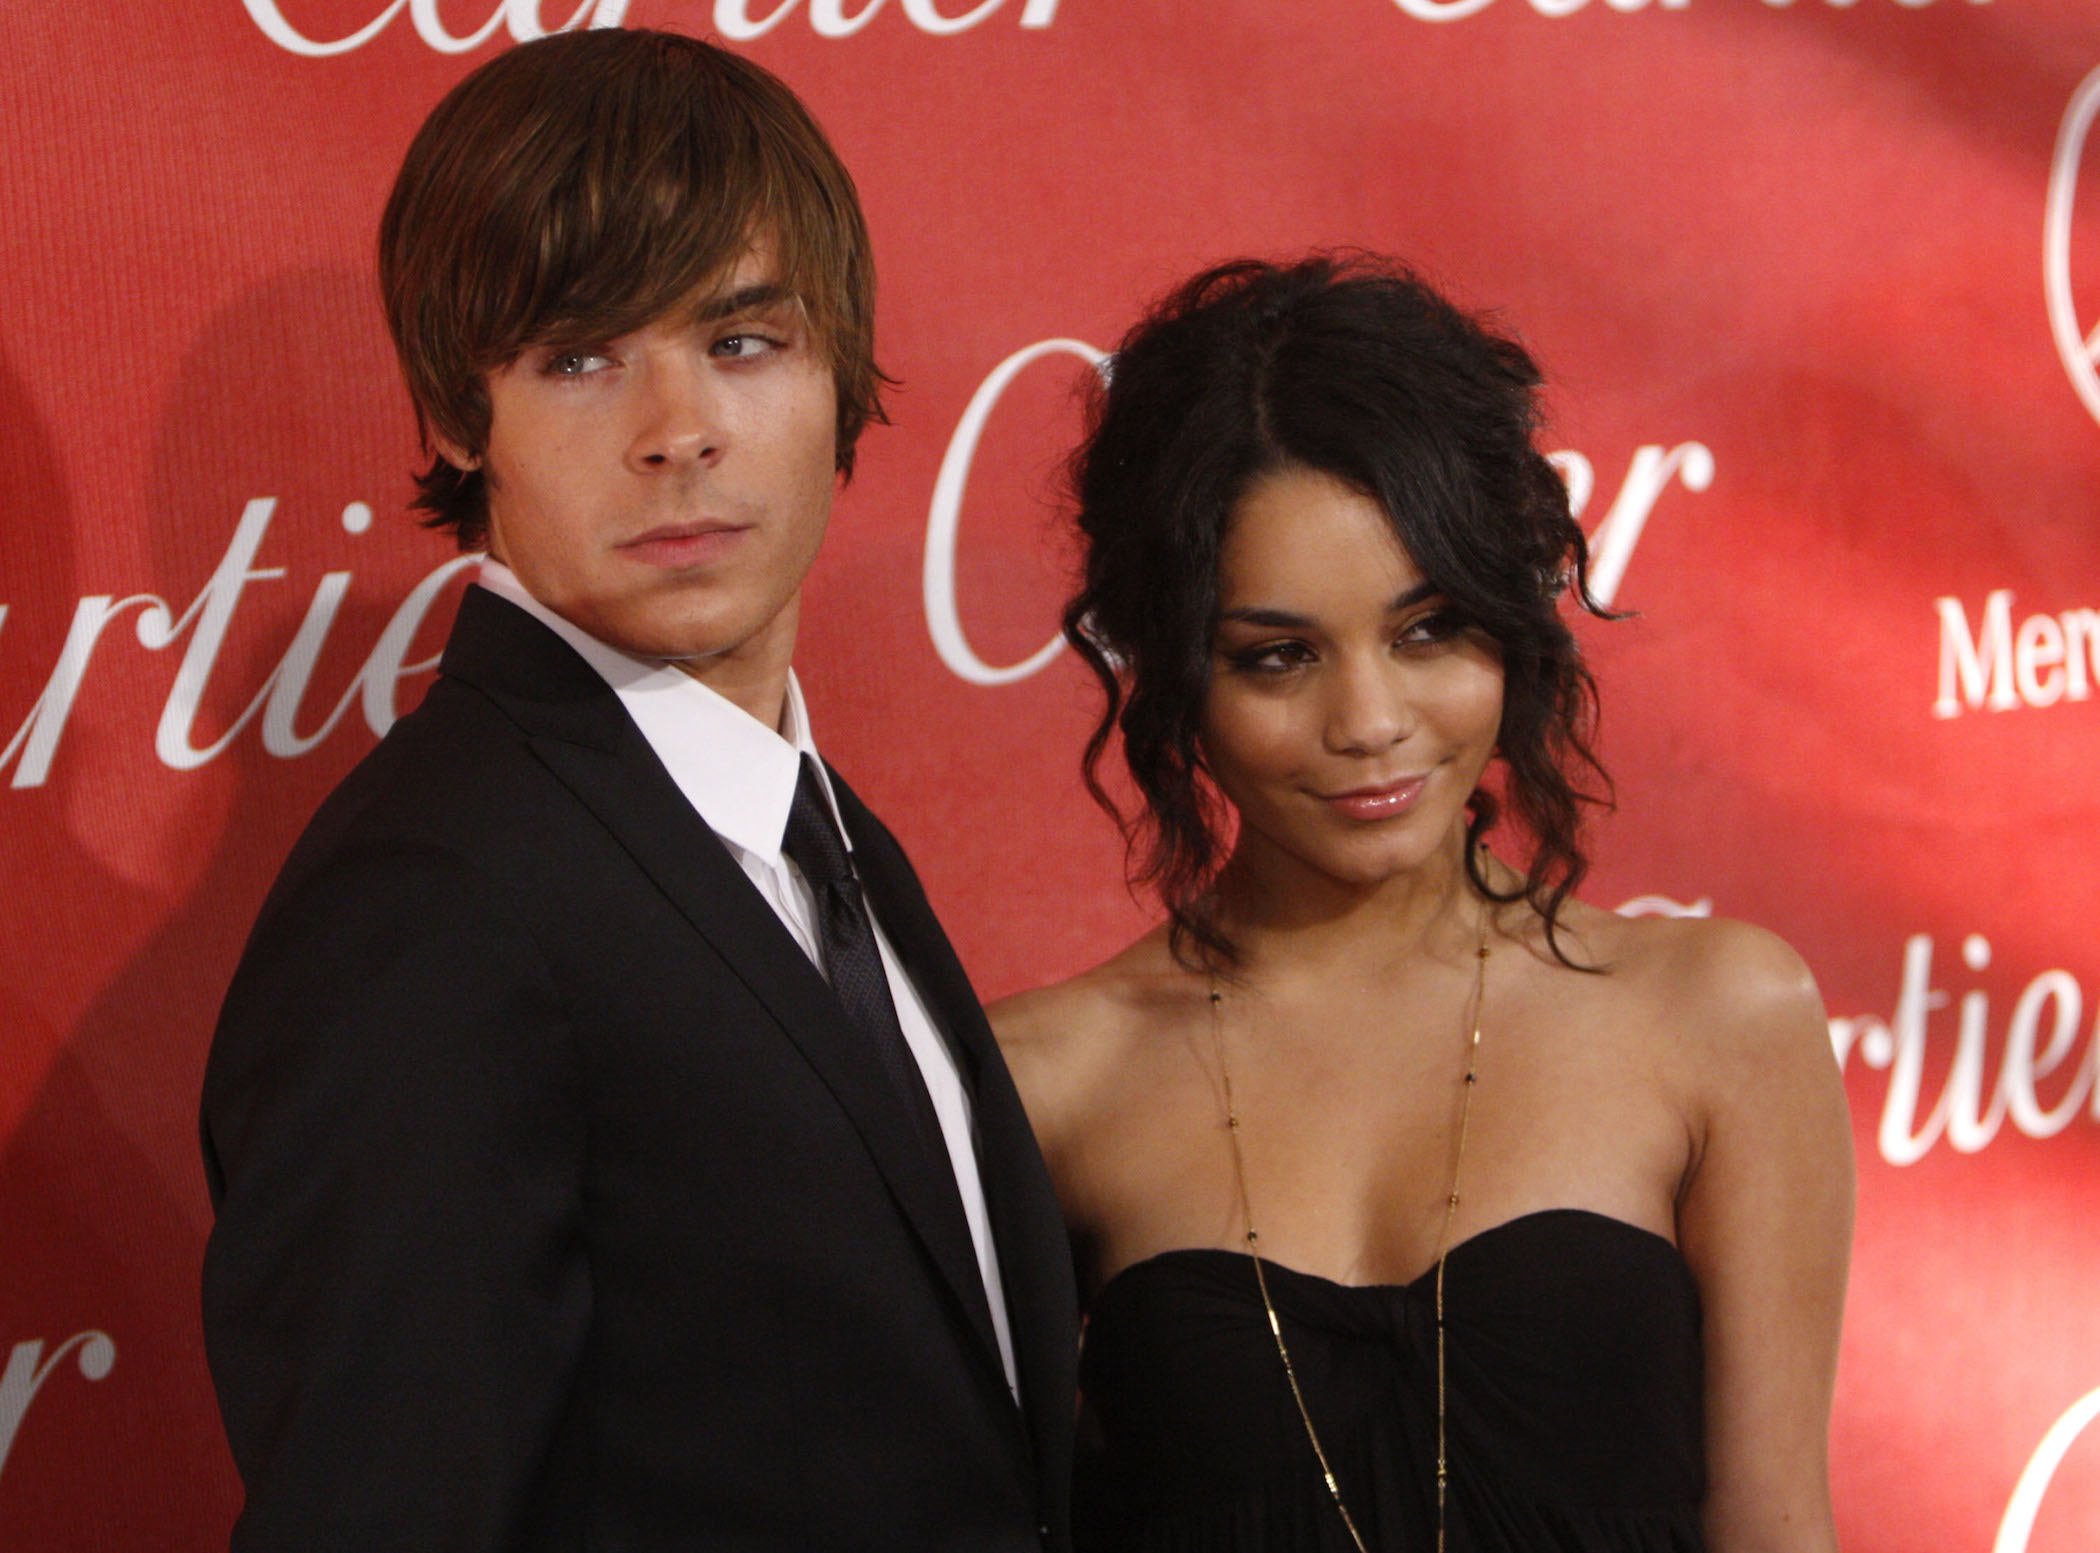 Actor Zac Efron (L) and actress Vanessa Hudgens arrives at the 2008 Palm Springs International Film Festival Awards Gala in 2008